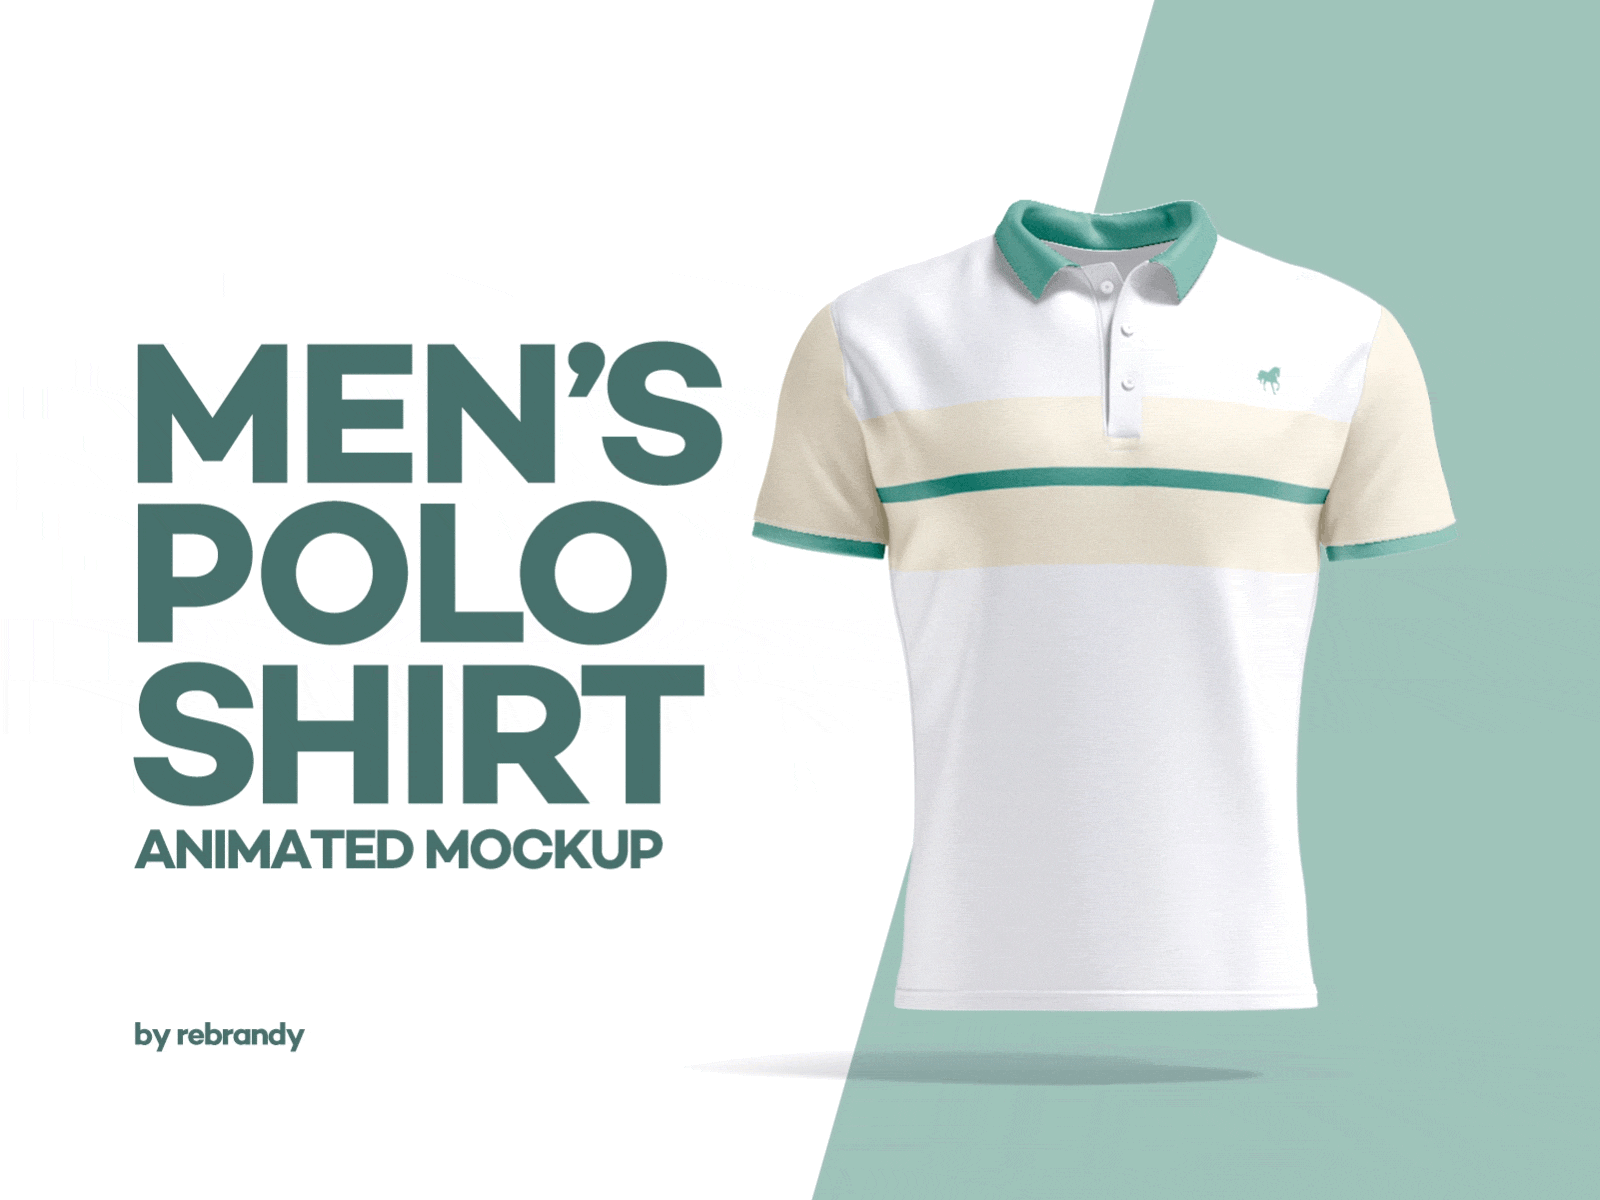 Men's Polo Shirt Animated Mockup animated classic clothing cotton male wear